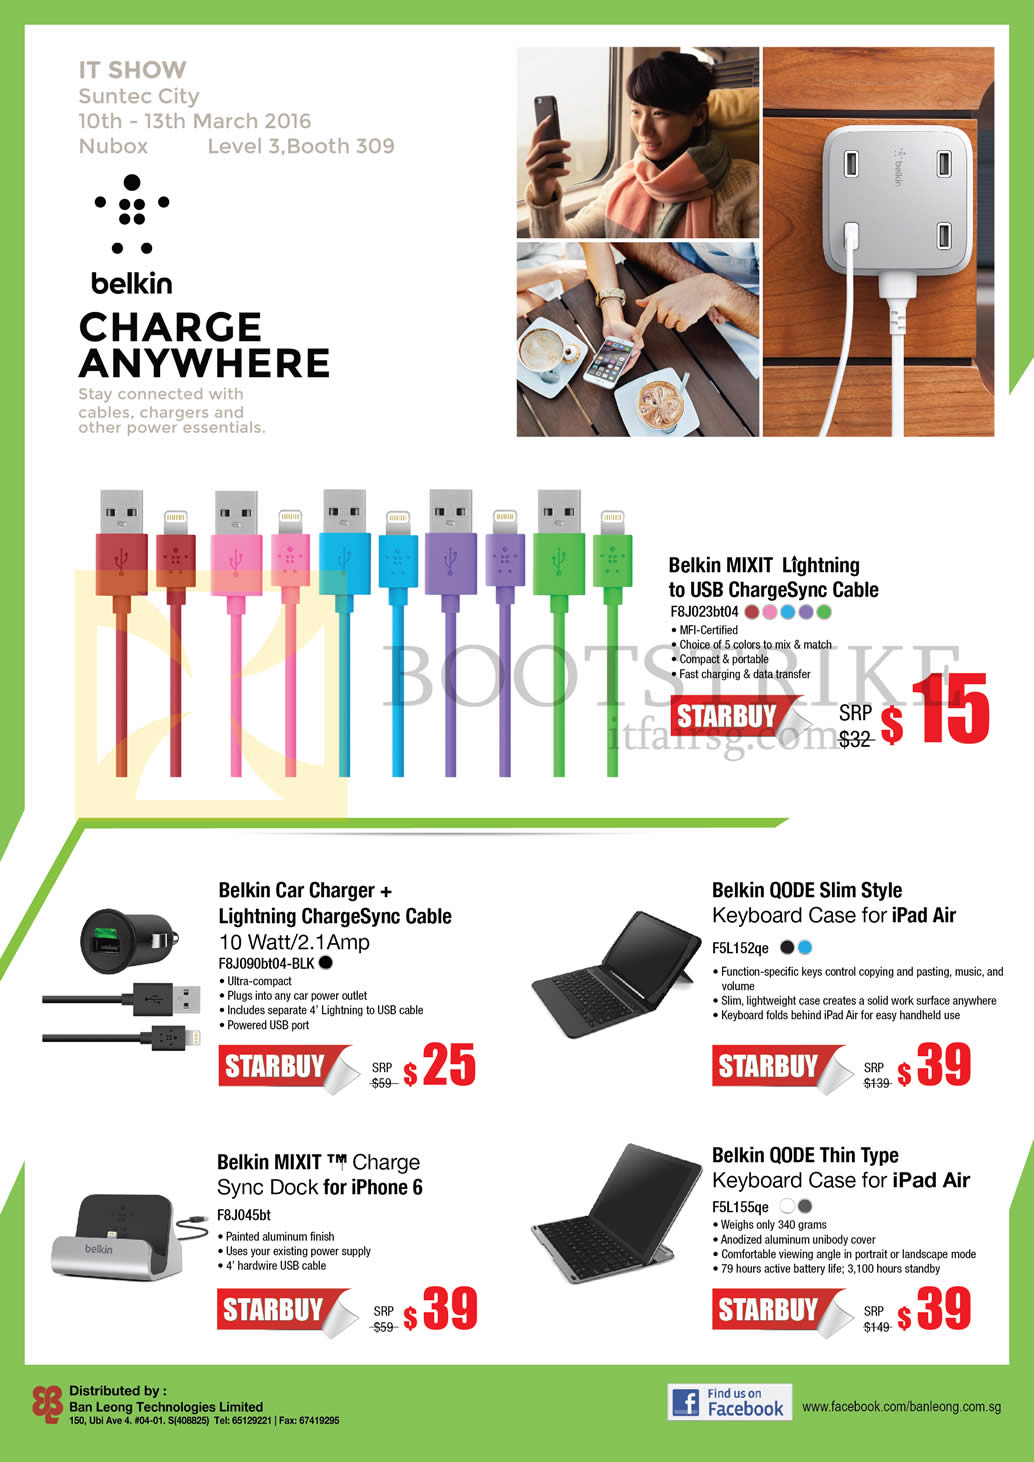 IT SHOW 2016 price list image brochure of Nubox Belkin Accessories Cable, Keyboard Case, Sync Dock, Belkin Mixit, QODE Slim Style, QODE Thin Type